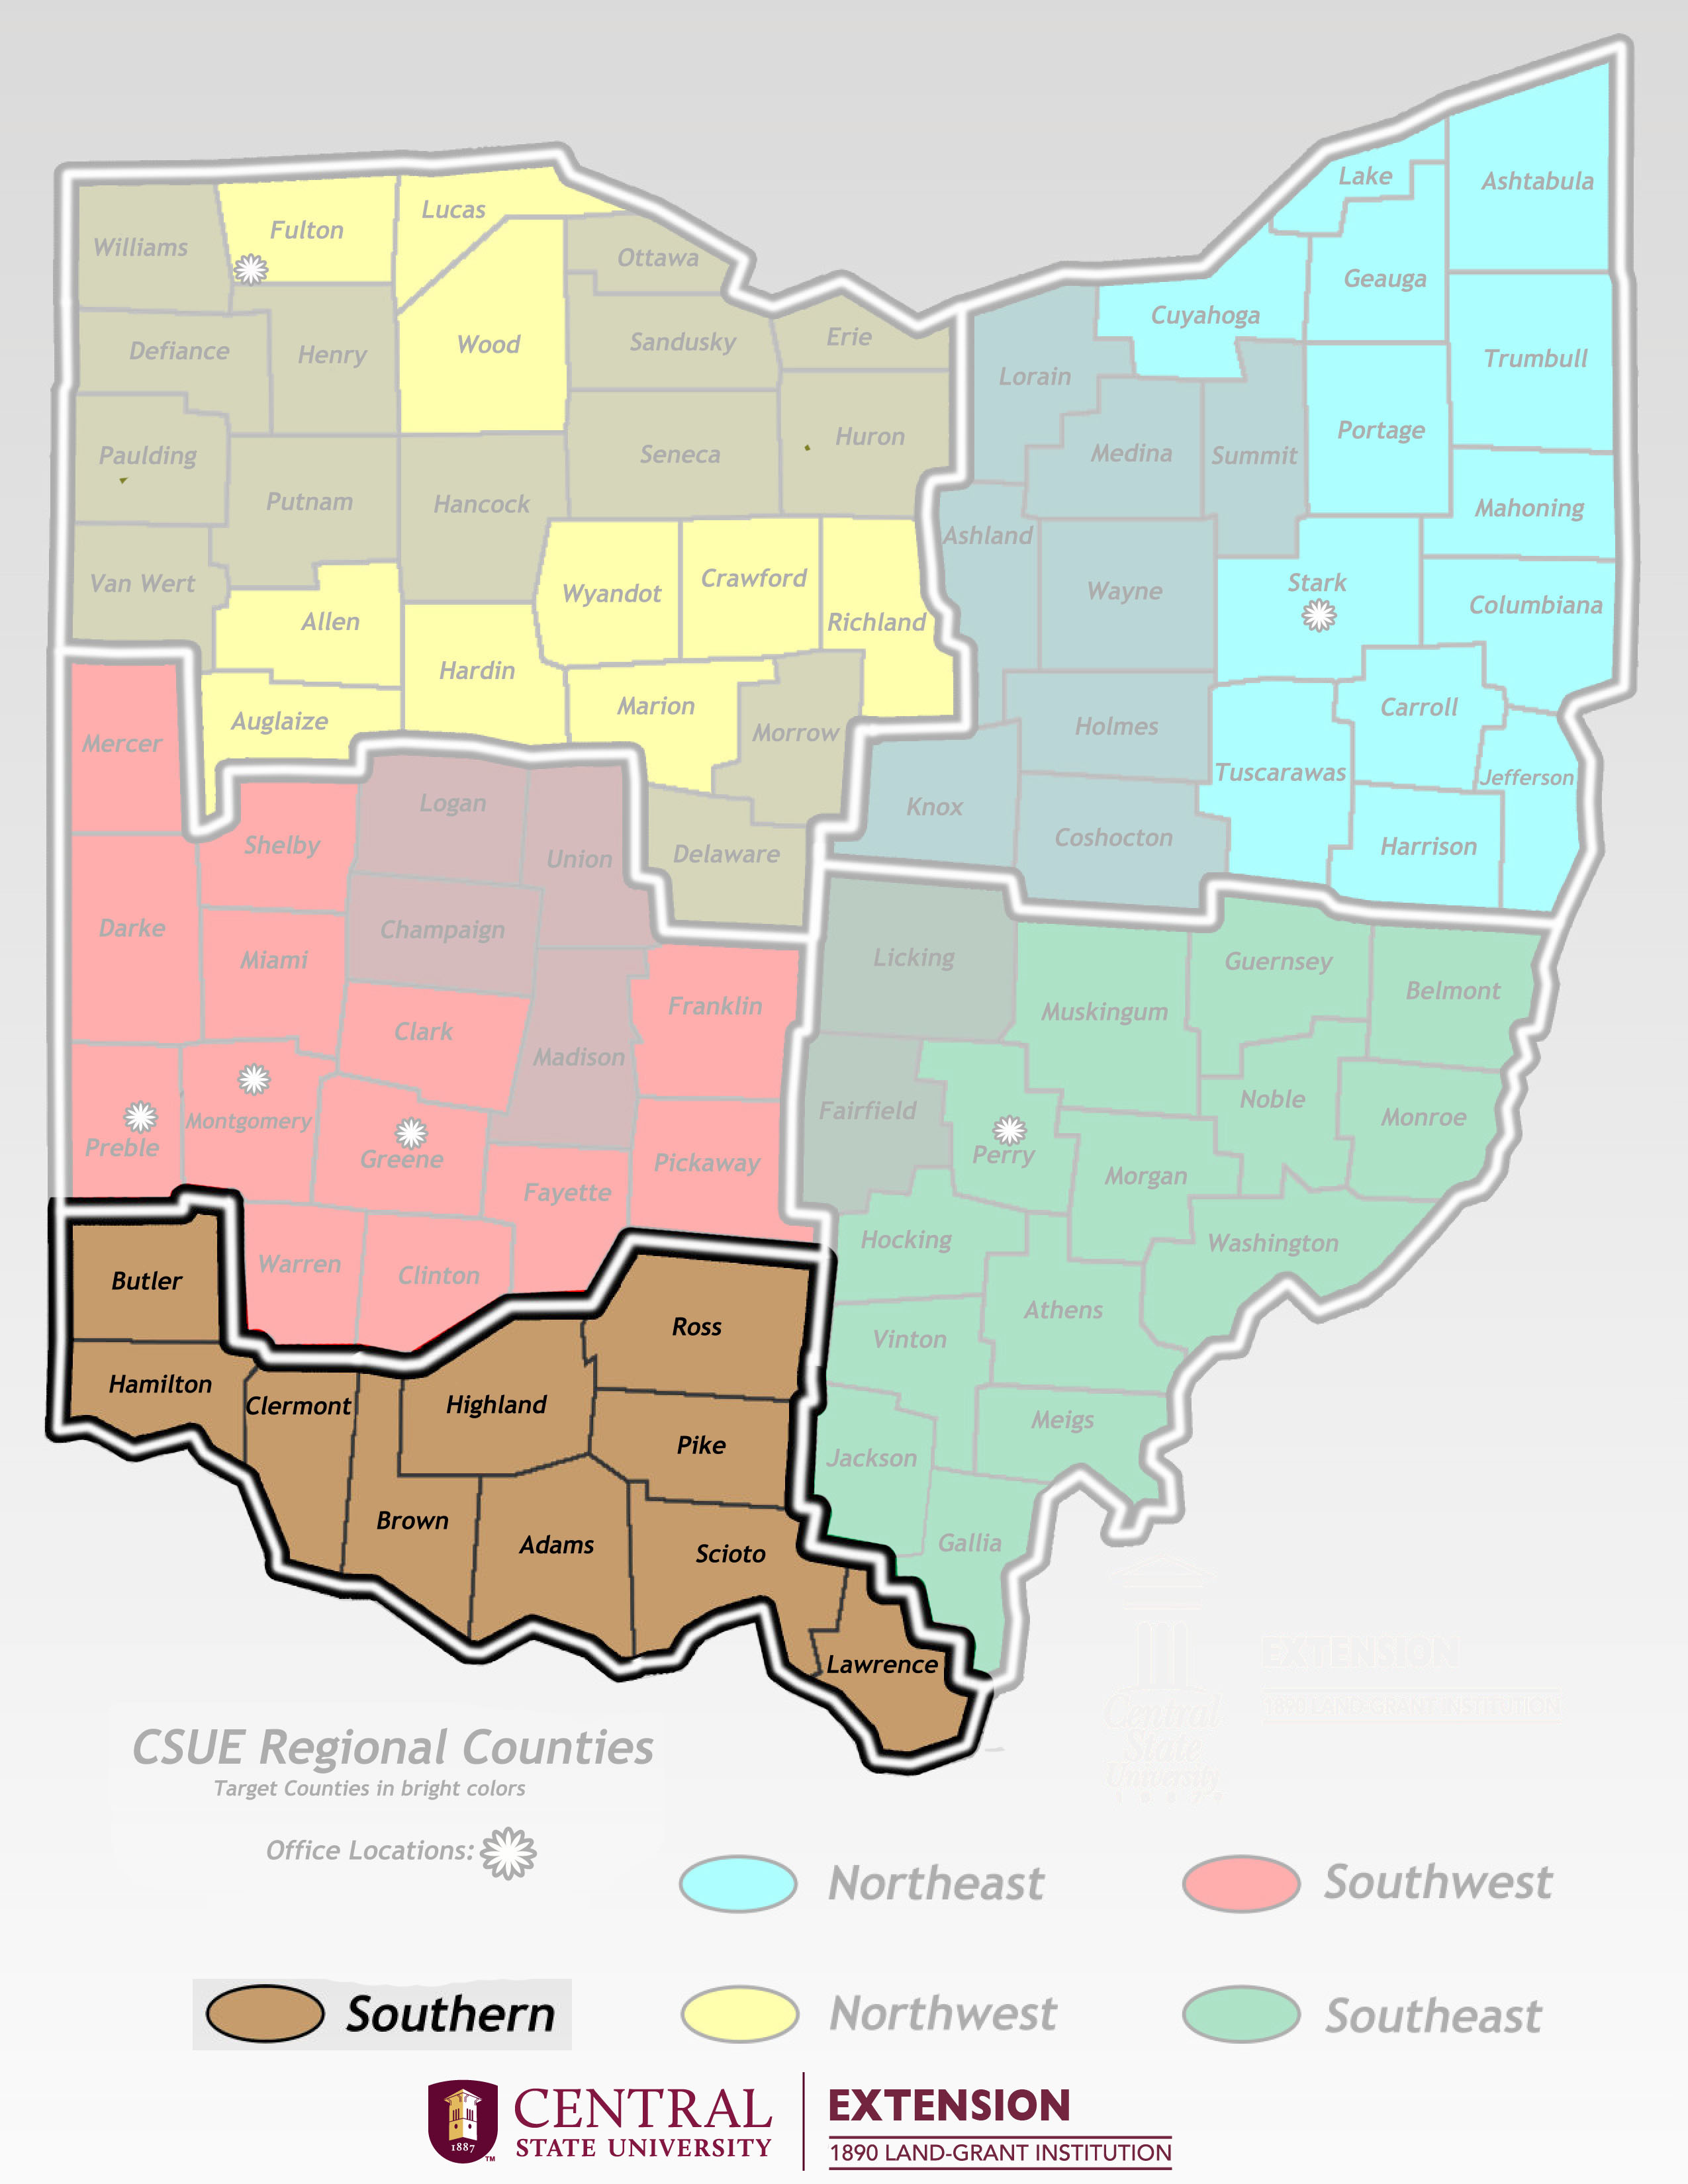 Southern Region map includes following counties Butler, Hamilton, Clermont, Highland, Brown, Adams, Pike, Ross, Scioto, Lawrence